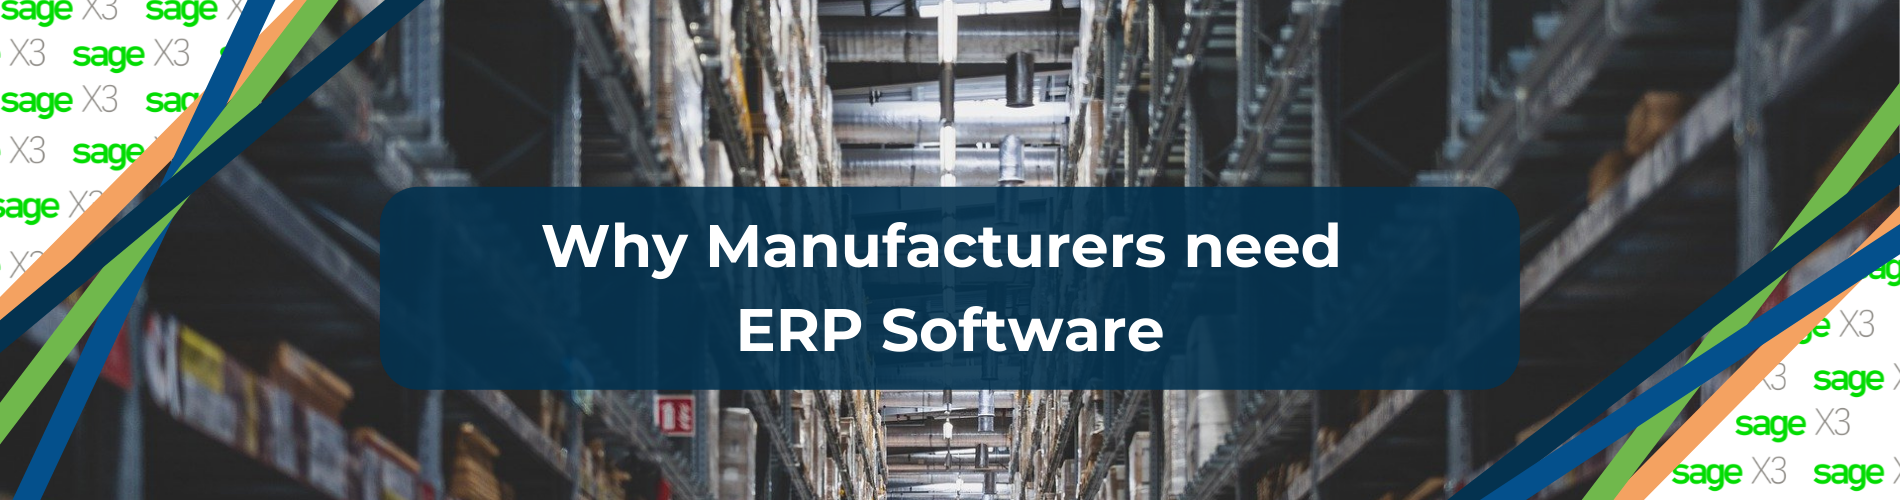 why manufacturers need erp software header